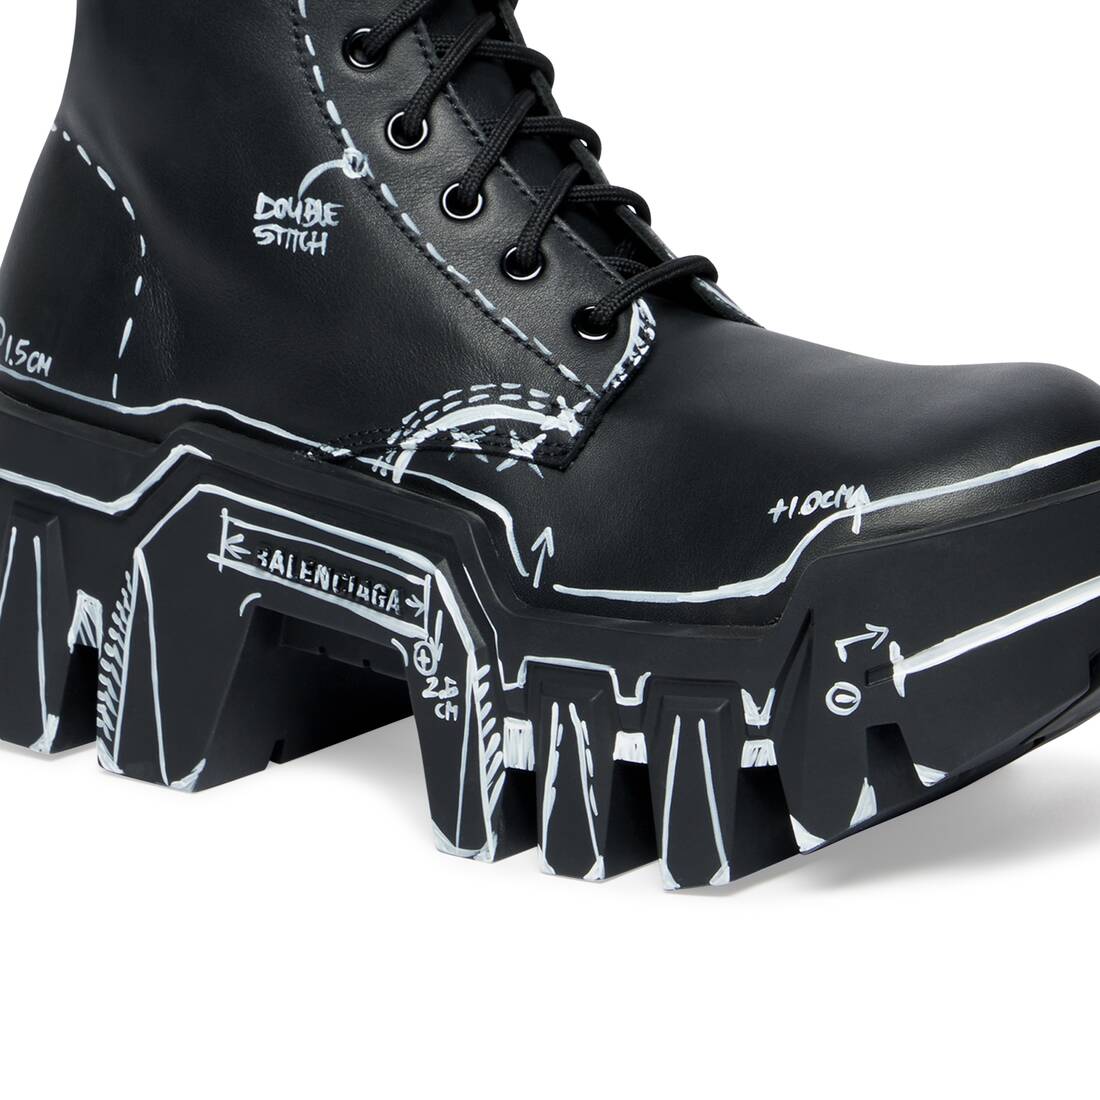 Women's Bulldozer Lace-up Boot in Black